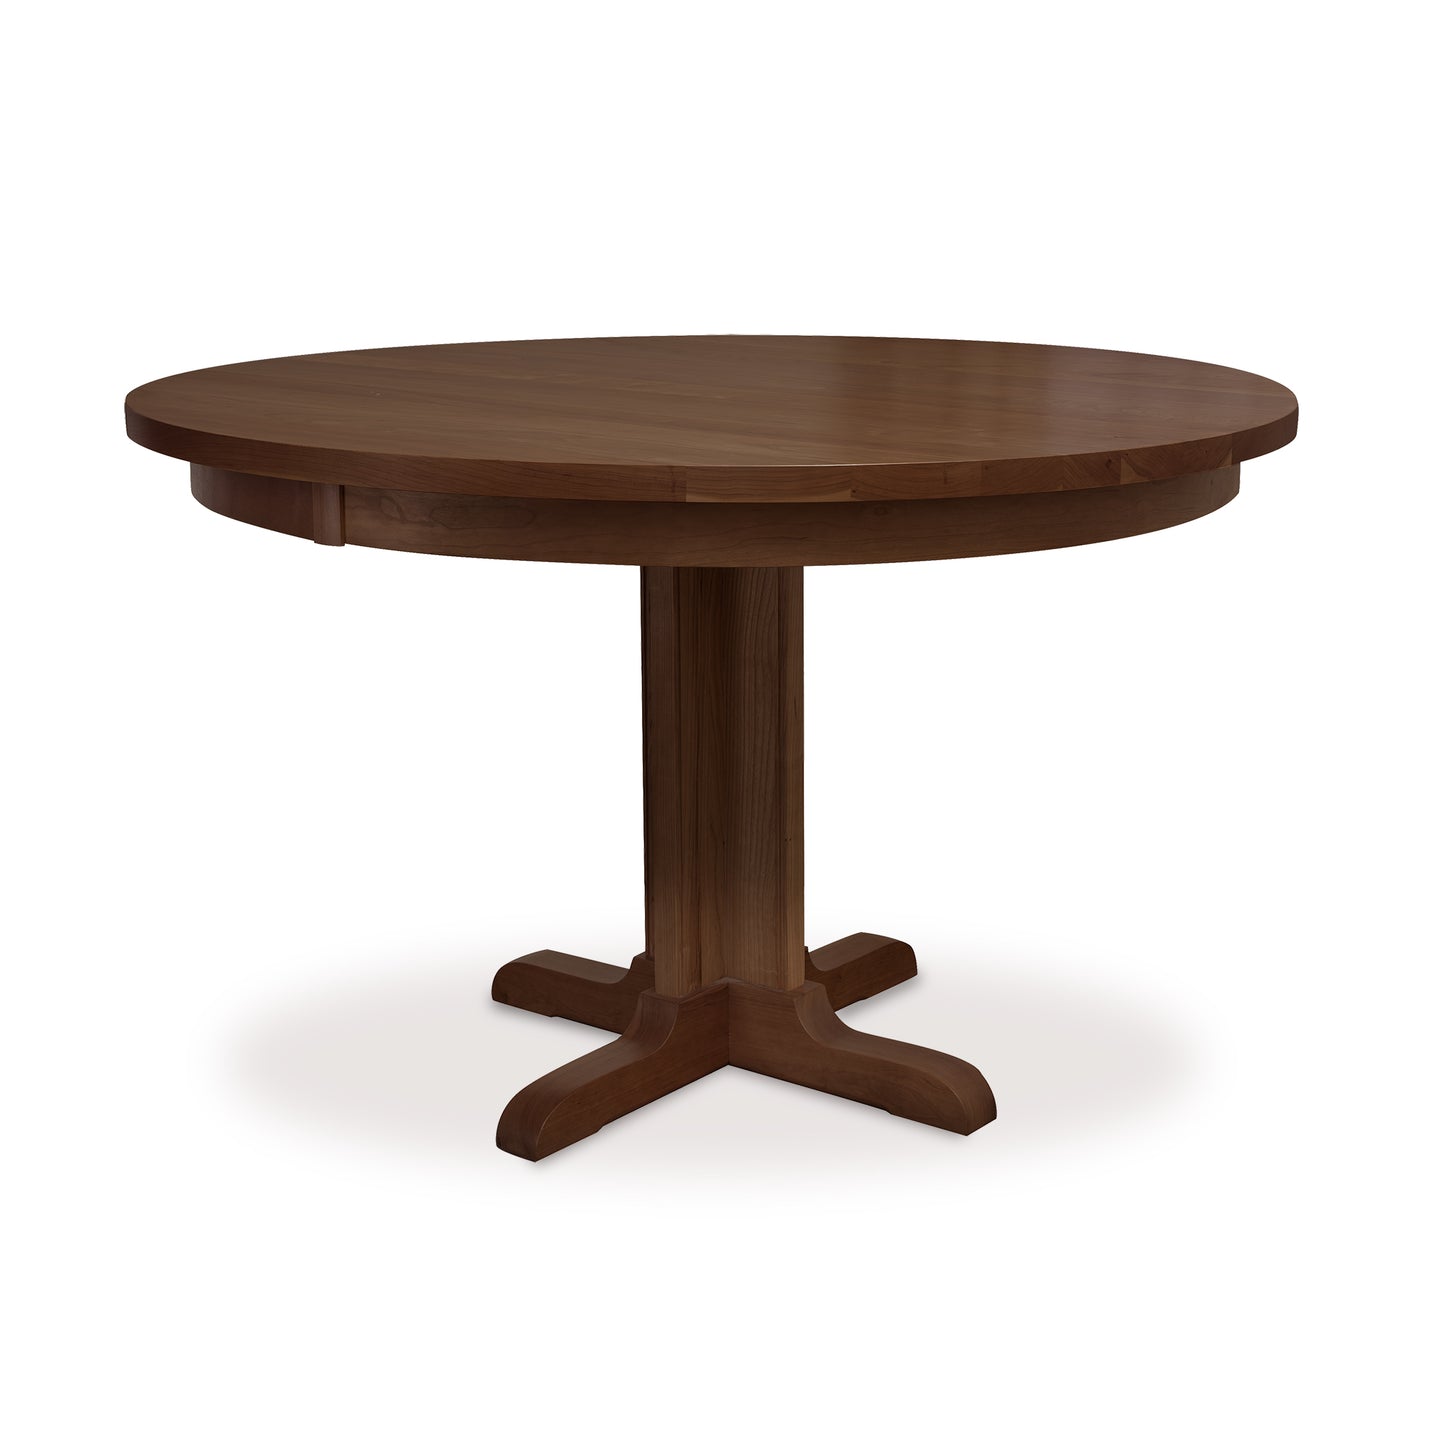 A sturdy Single - Leg Round Pedestal Table with a wooden base by Lyndon Furniture.